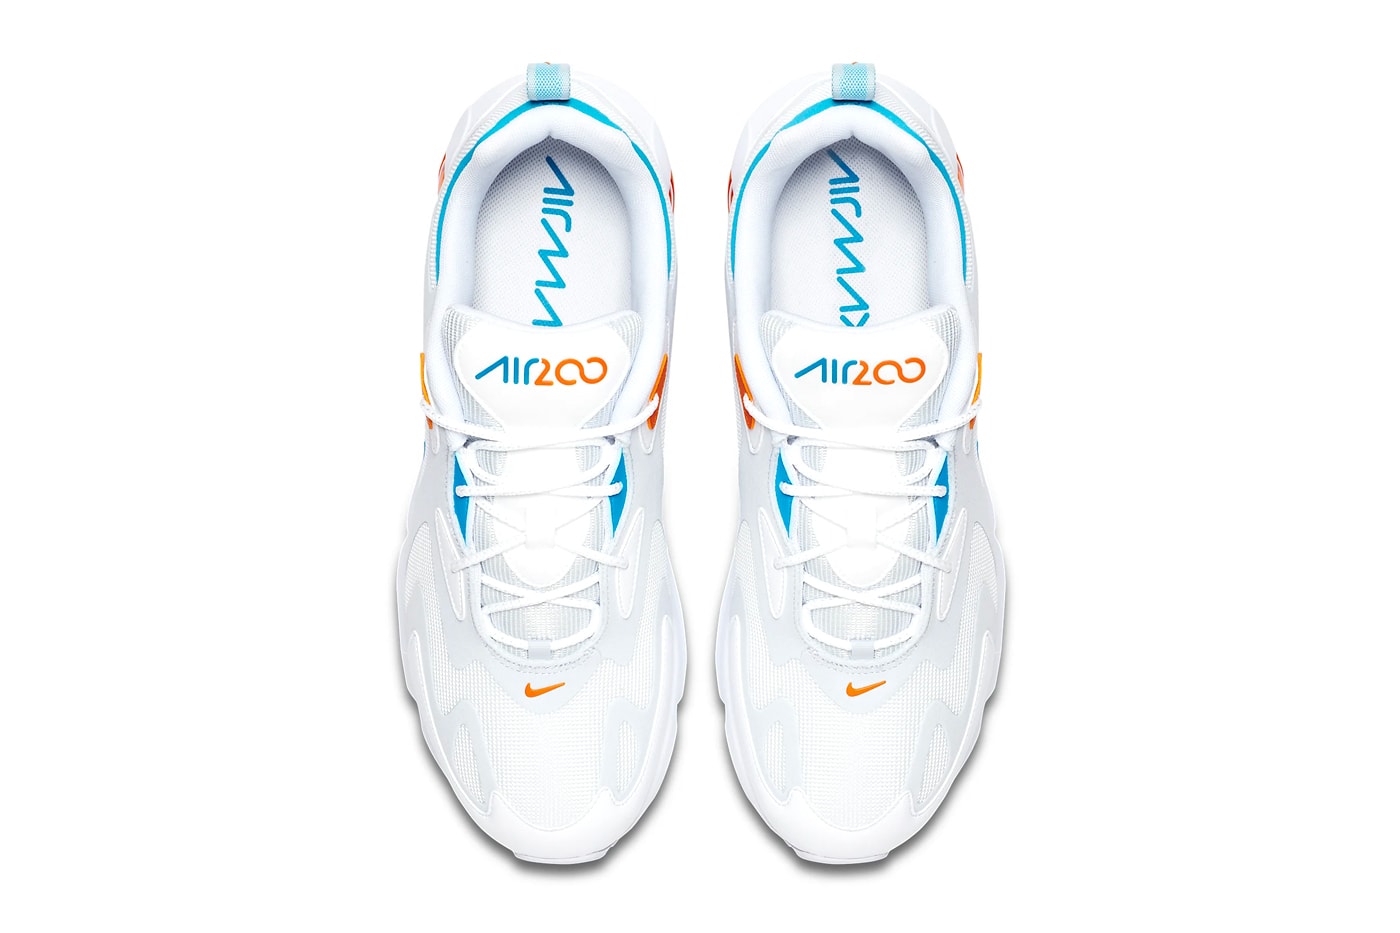 Nike Air Max 200 White Laser Blue Football Gray Bombay CT1262 001 Miami Dolphins Color sneakers footwear shoes menswear streetwear spring summer 2020 collection sneakers trainers